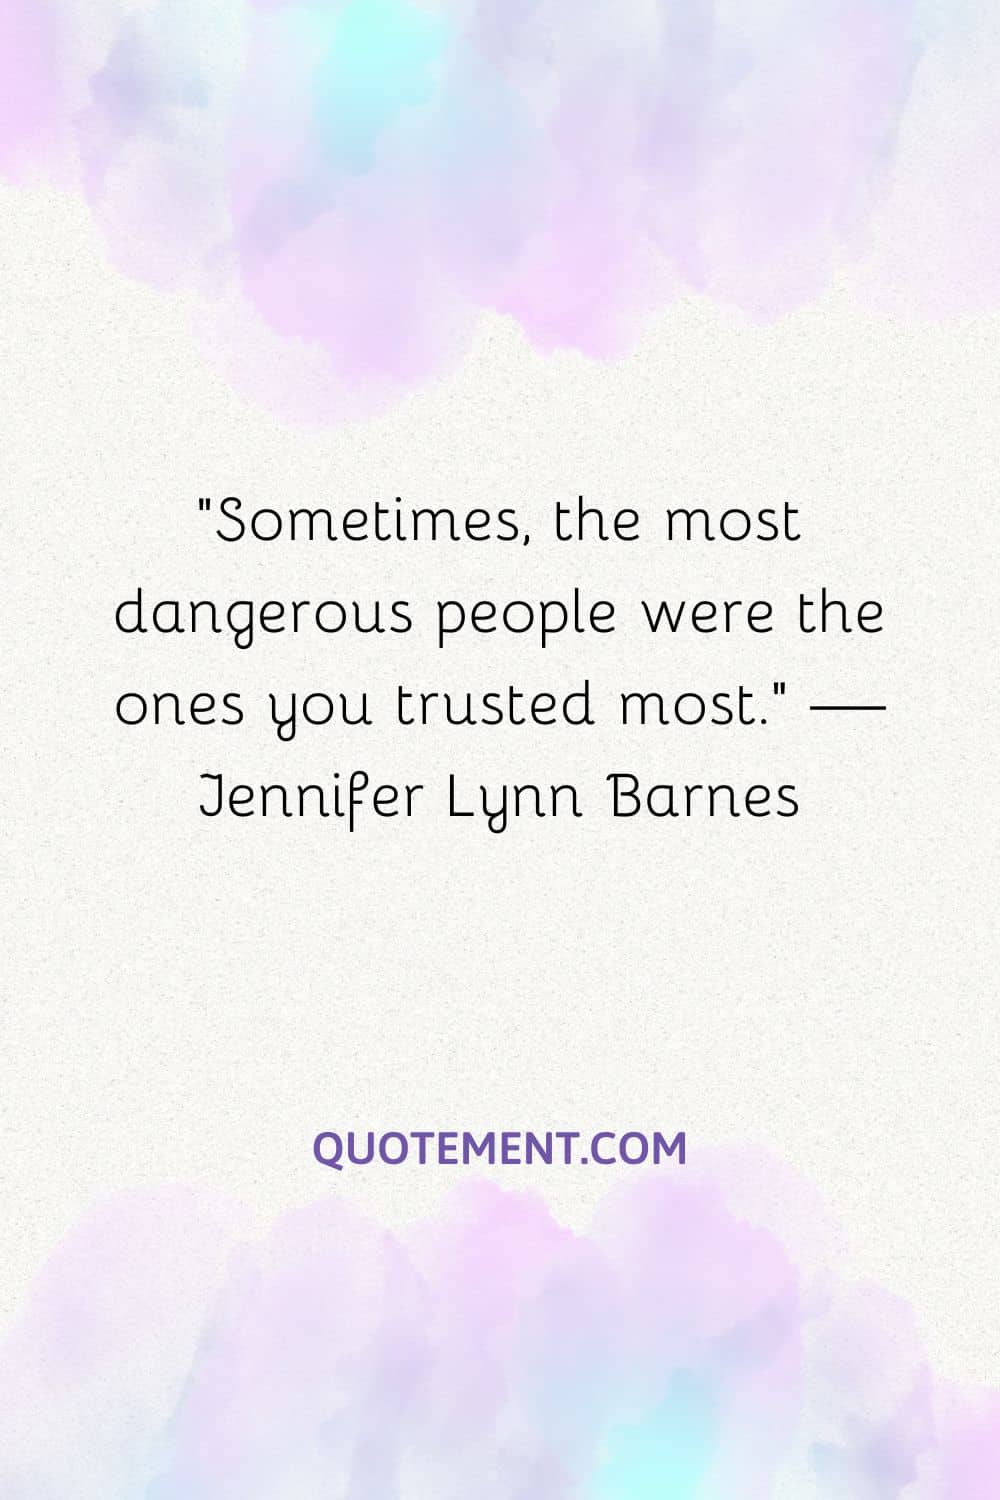 Sometimes, the most dangerous people were the ones you trusted most